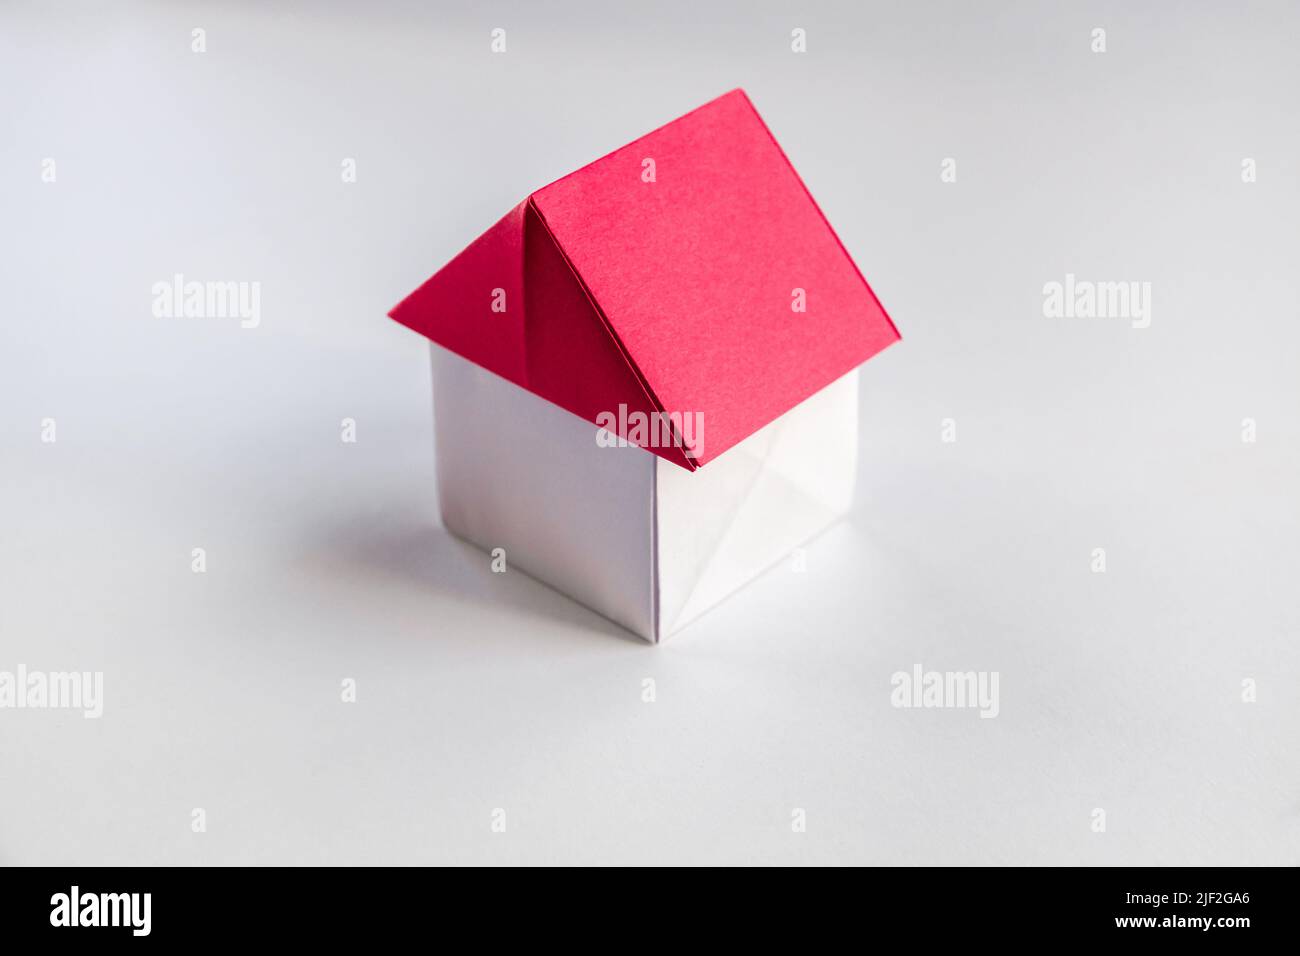 White and red paper house origami isolated on a blank background. Stock Photo